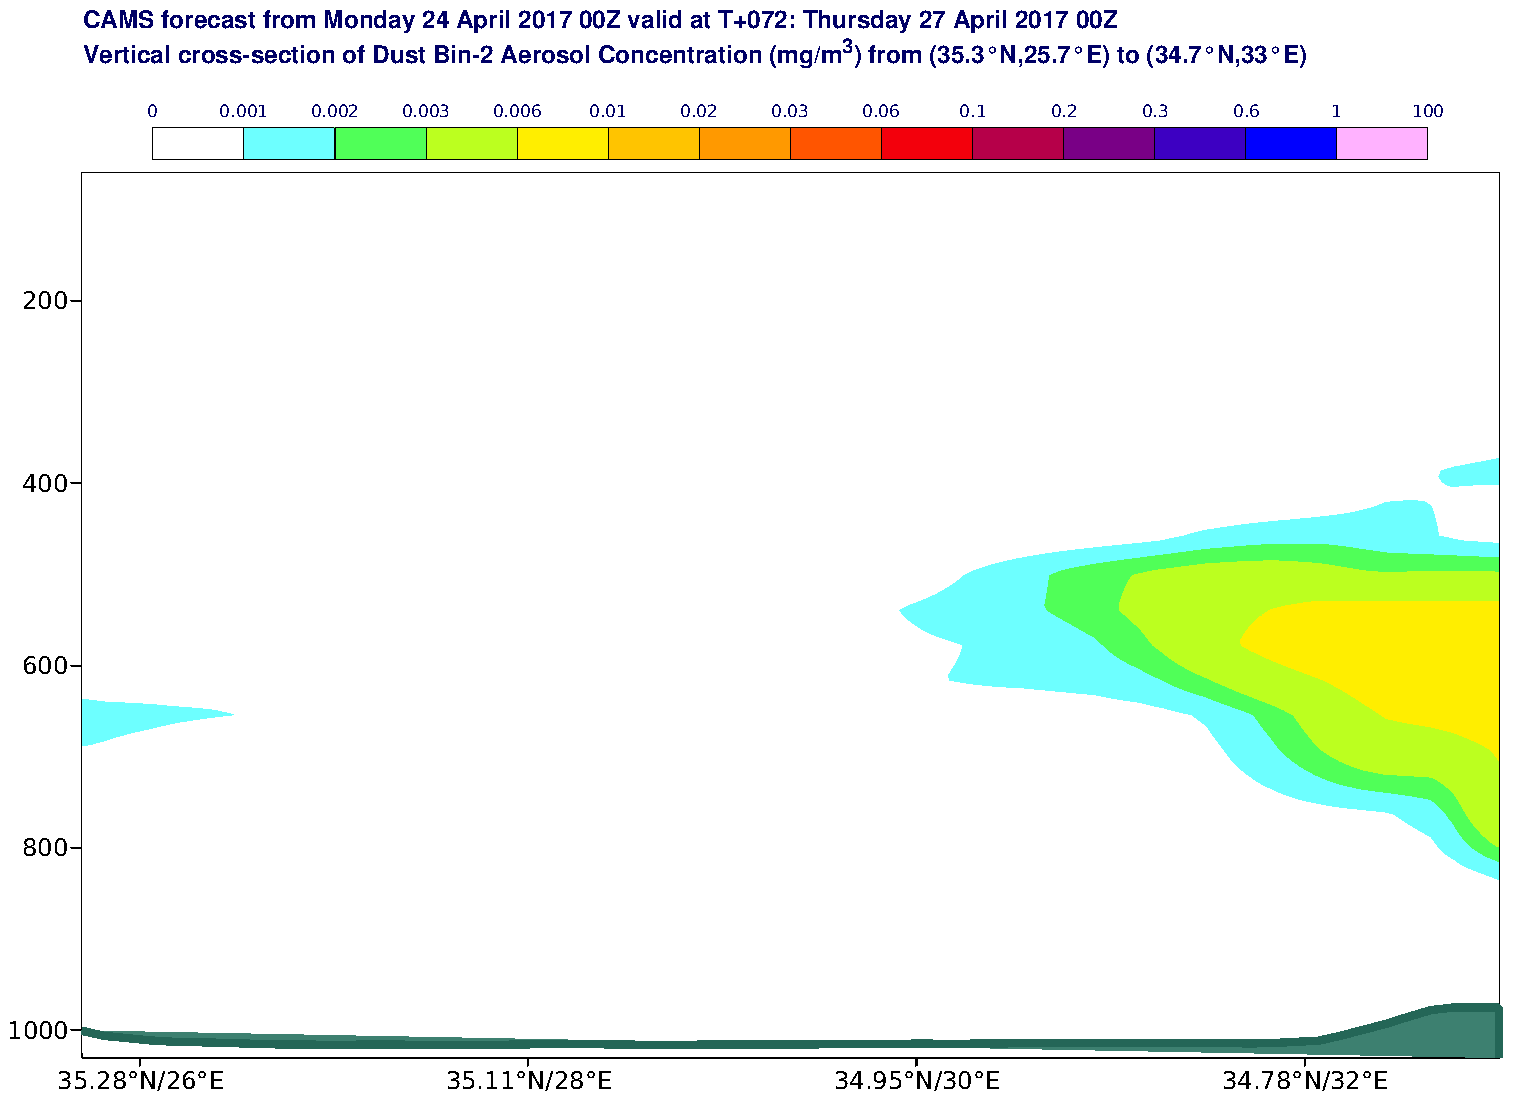 Vertical cross-section of Dust Bin-2 Aerosol Concentration (mg/m3) valid at T72 - 2017-04-27 00:00